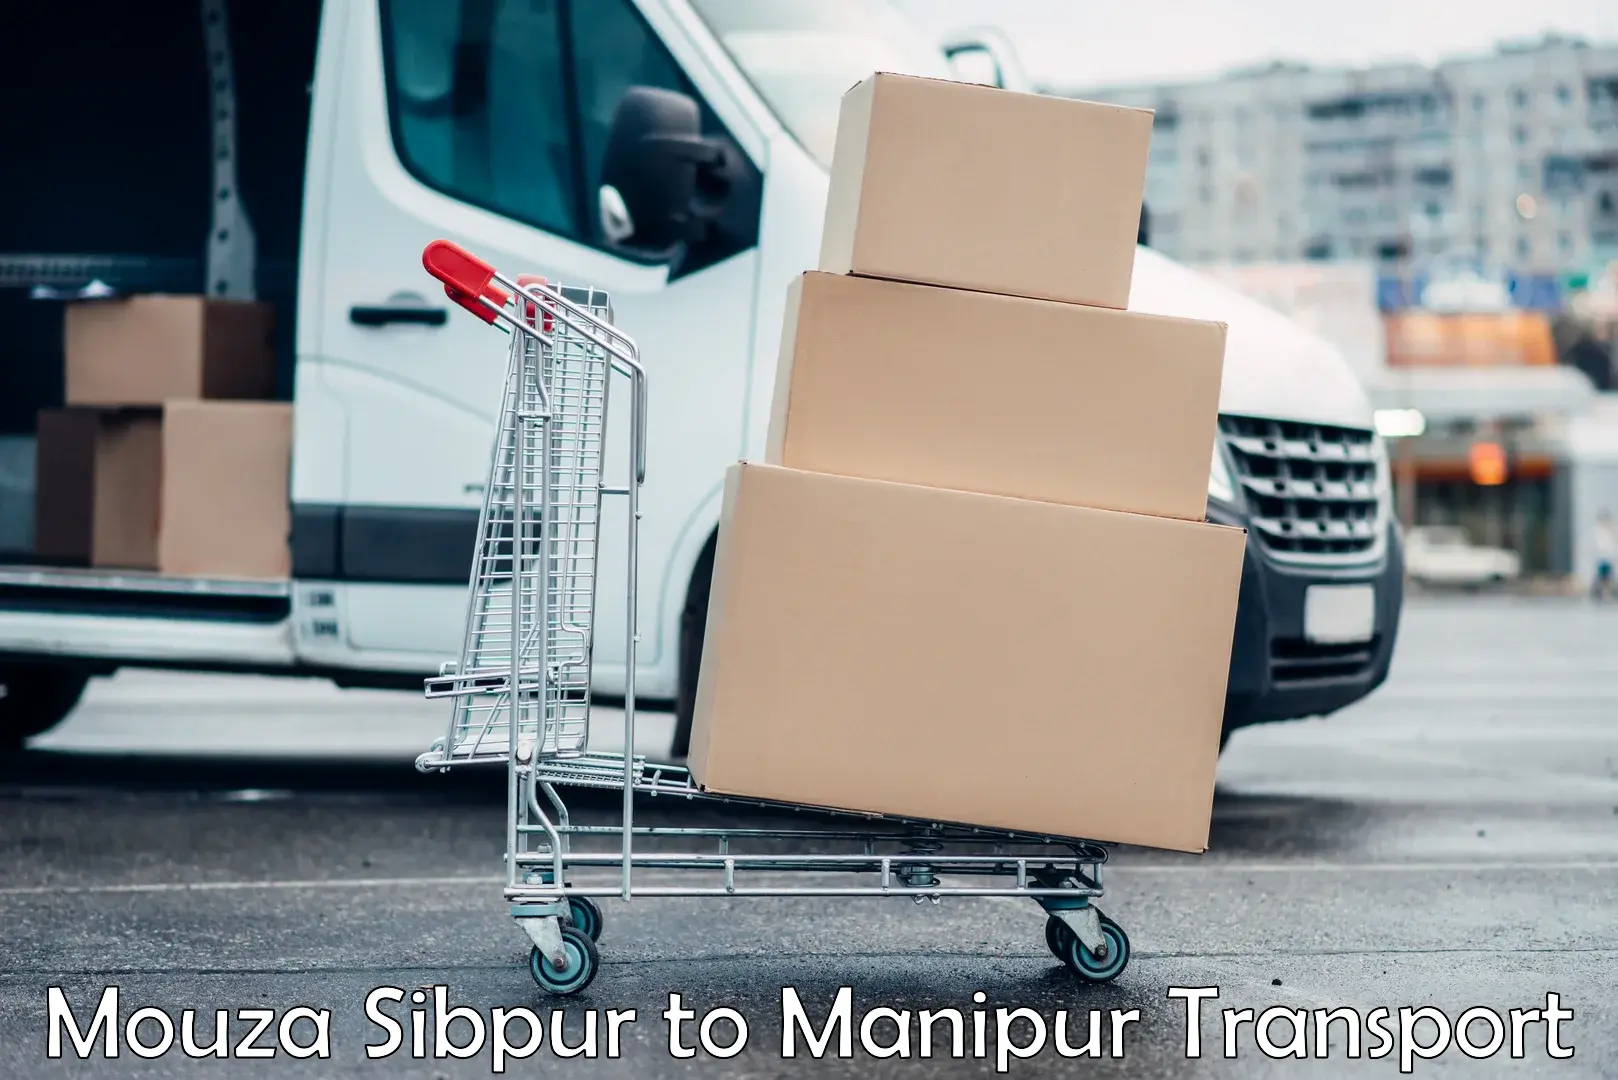 Nearby transport service Mouza Sibpur to Imphal